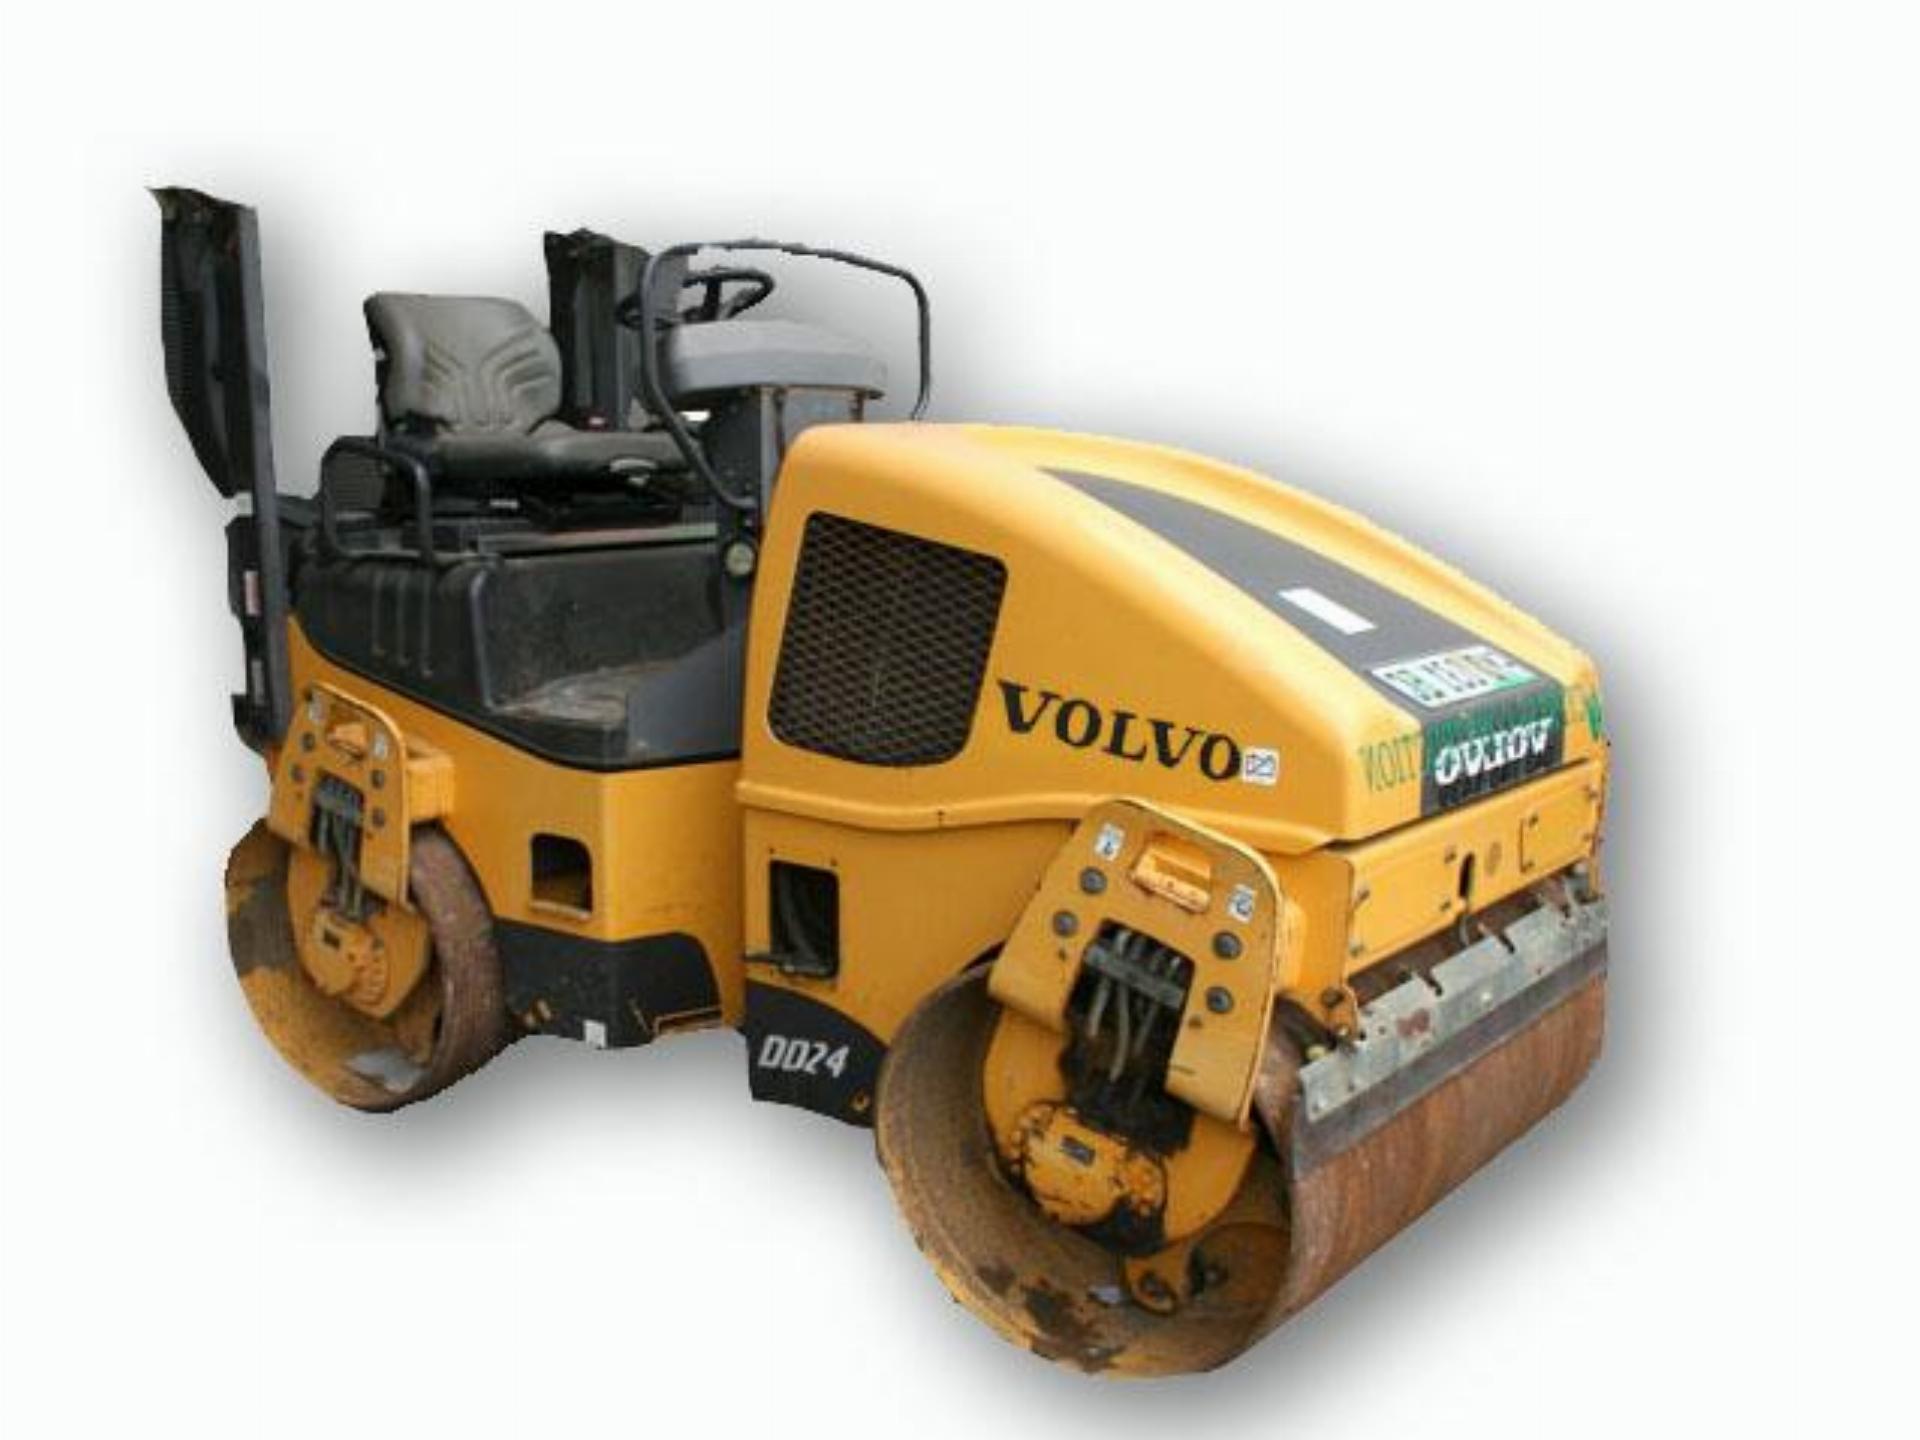 Volvo DD24 Double Roller